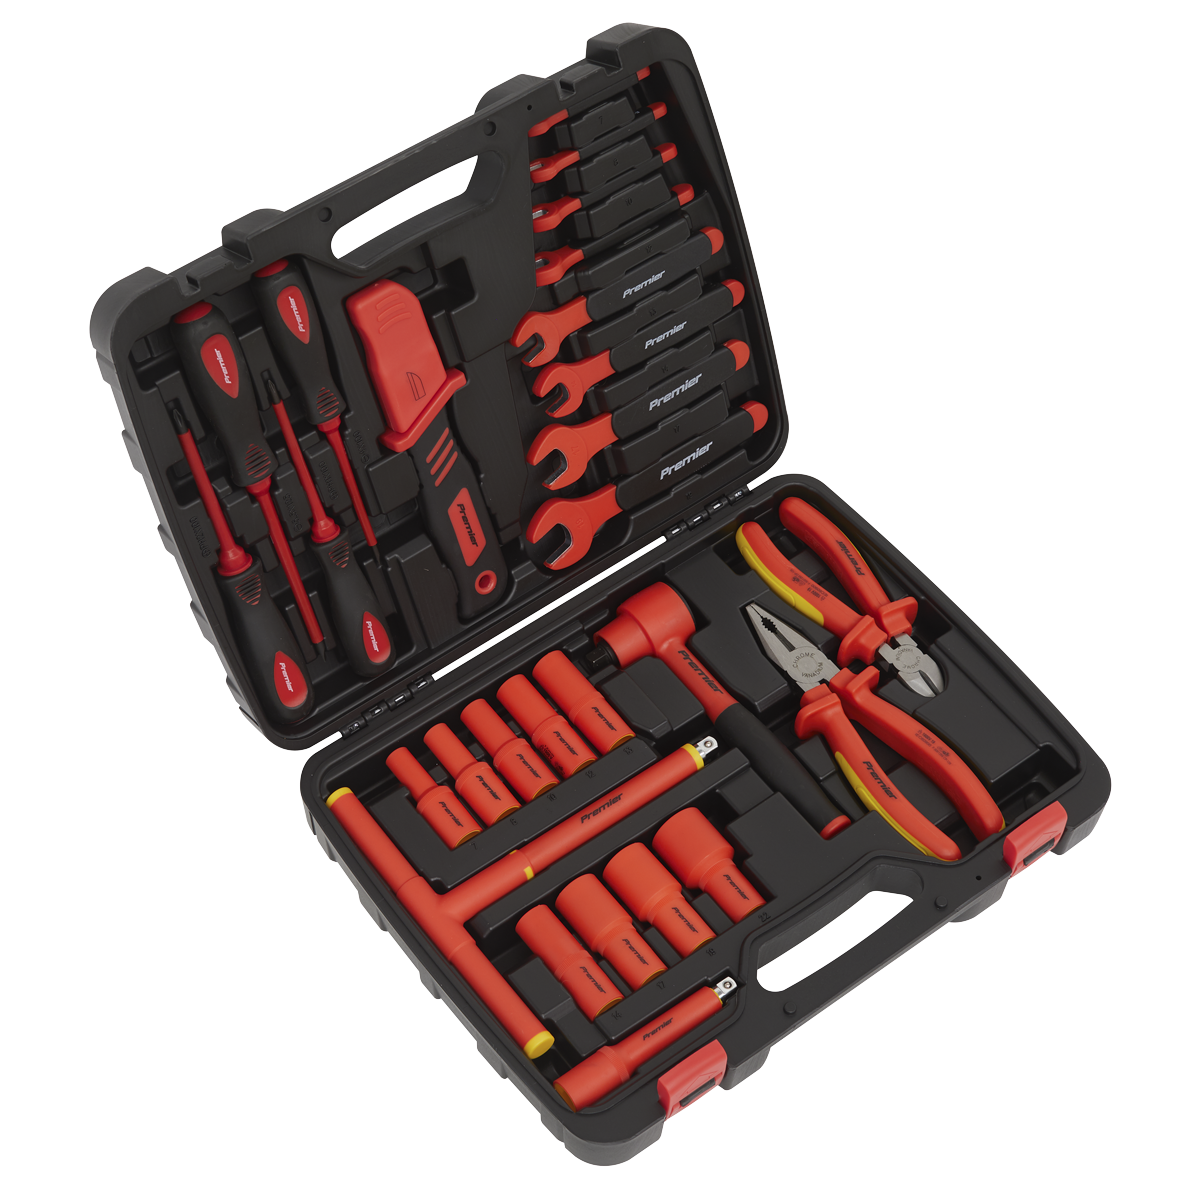 1000V Insulated Tool Kit 27pc - VDE Approved - AK7945 - Farming Parts